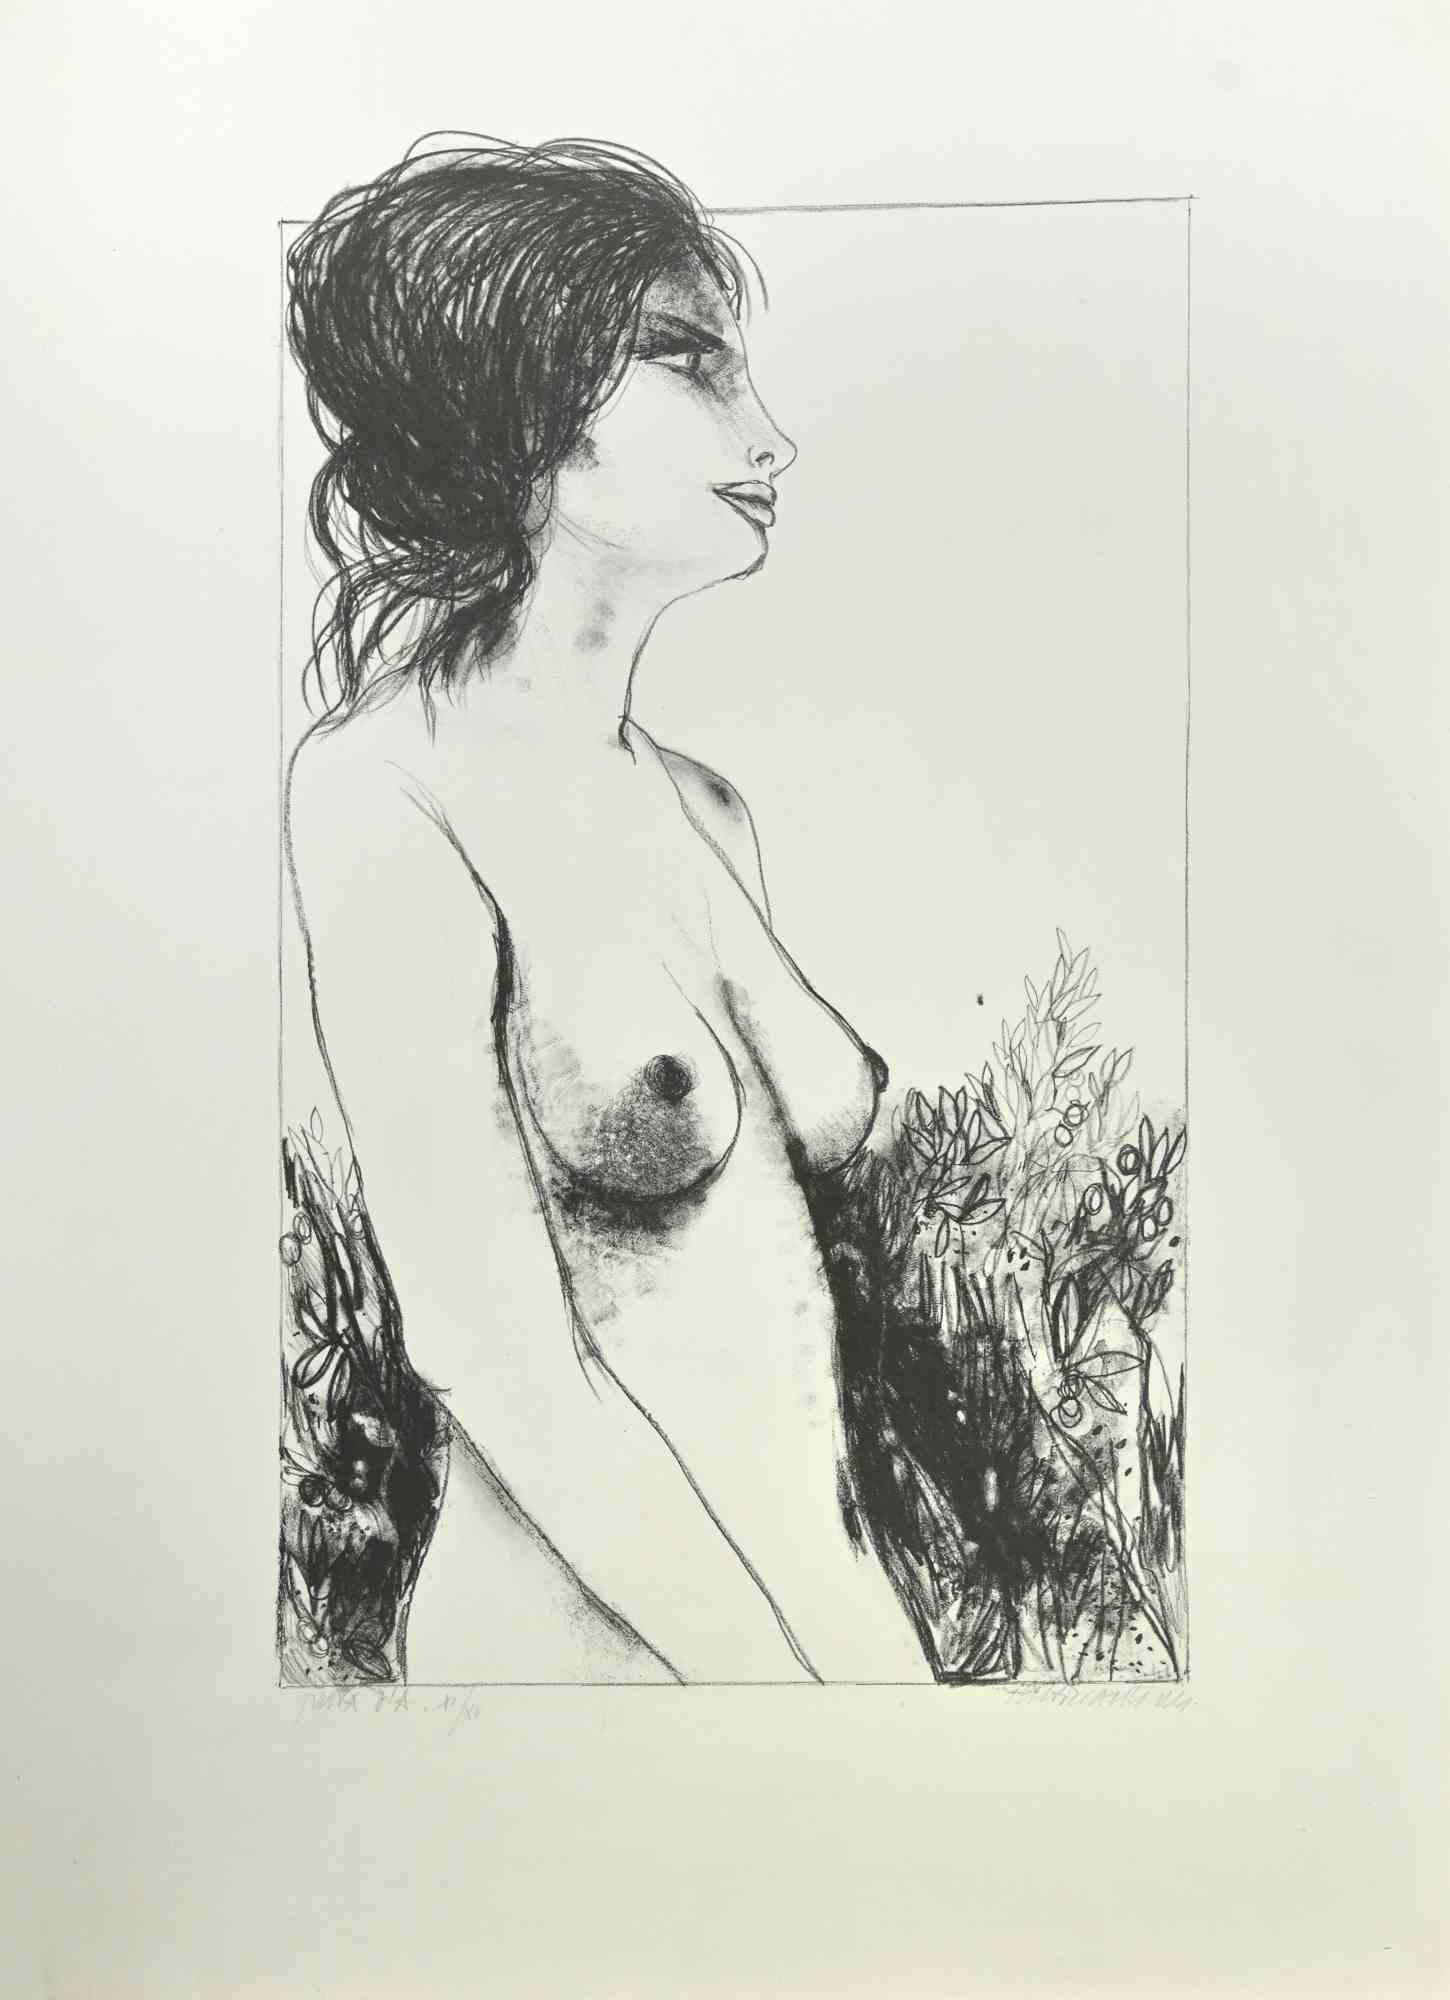 Nude of Woman is a Lithograph realized by Carlo Marcantonio in 1970s.

This print is hand signed. This is an edition of 50 prints plus some artist's proofs, numbered 11/15.

Prints are the most affordable and reasonably priced artworks. These